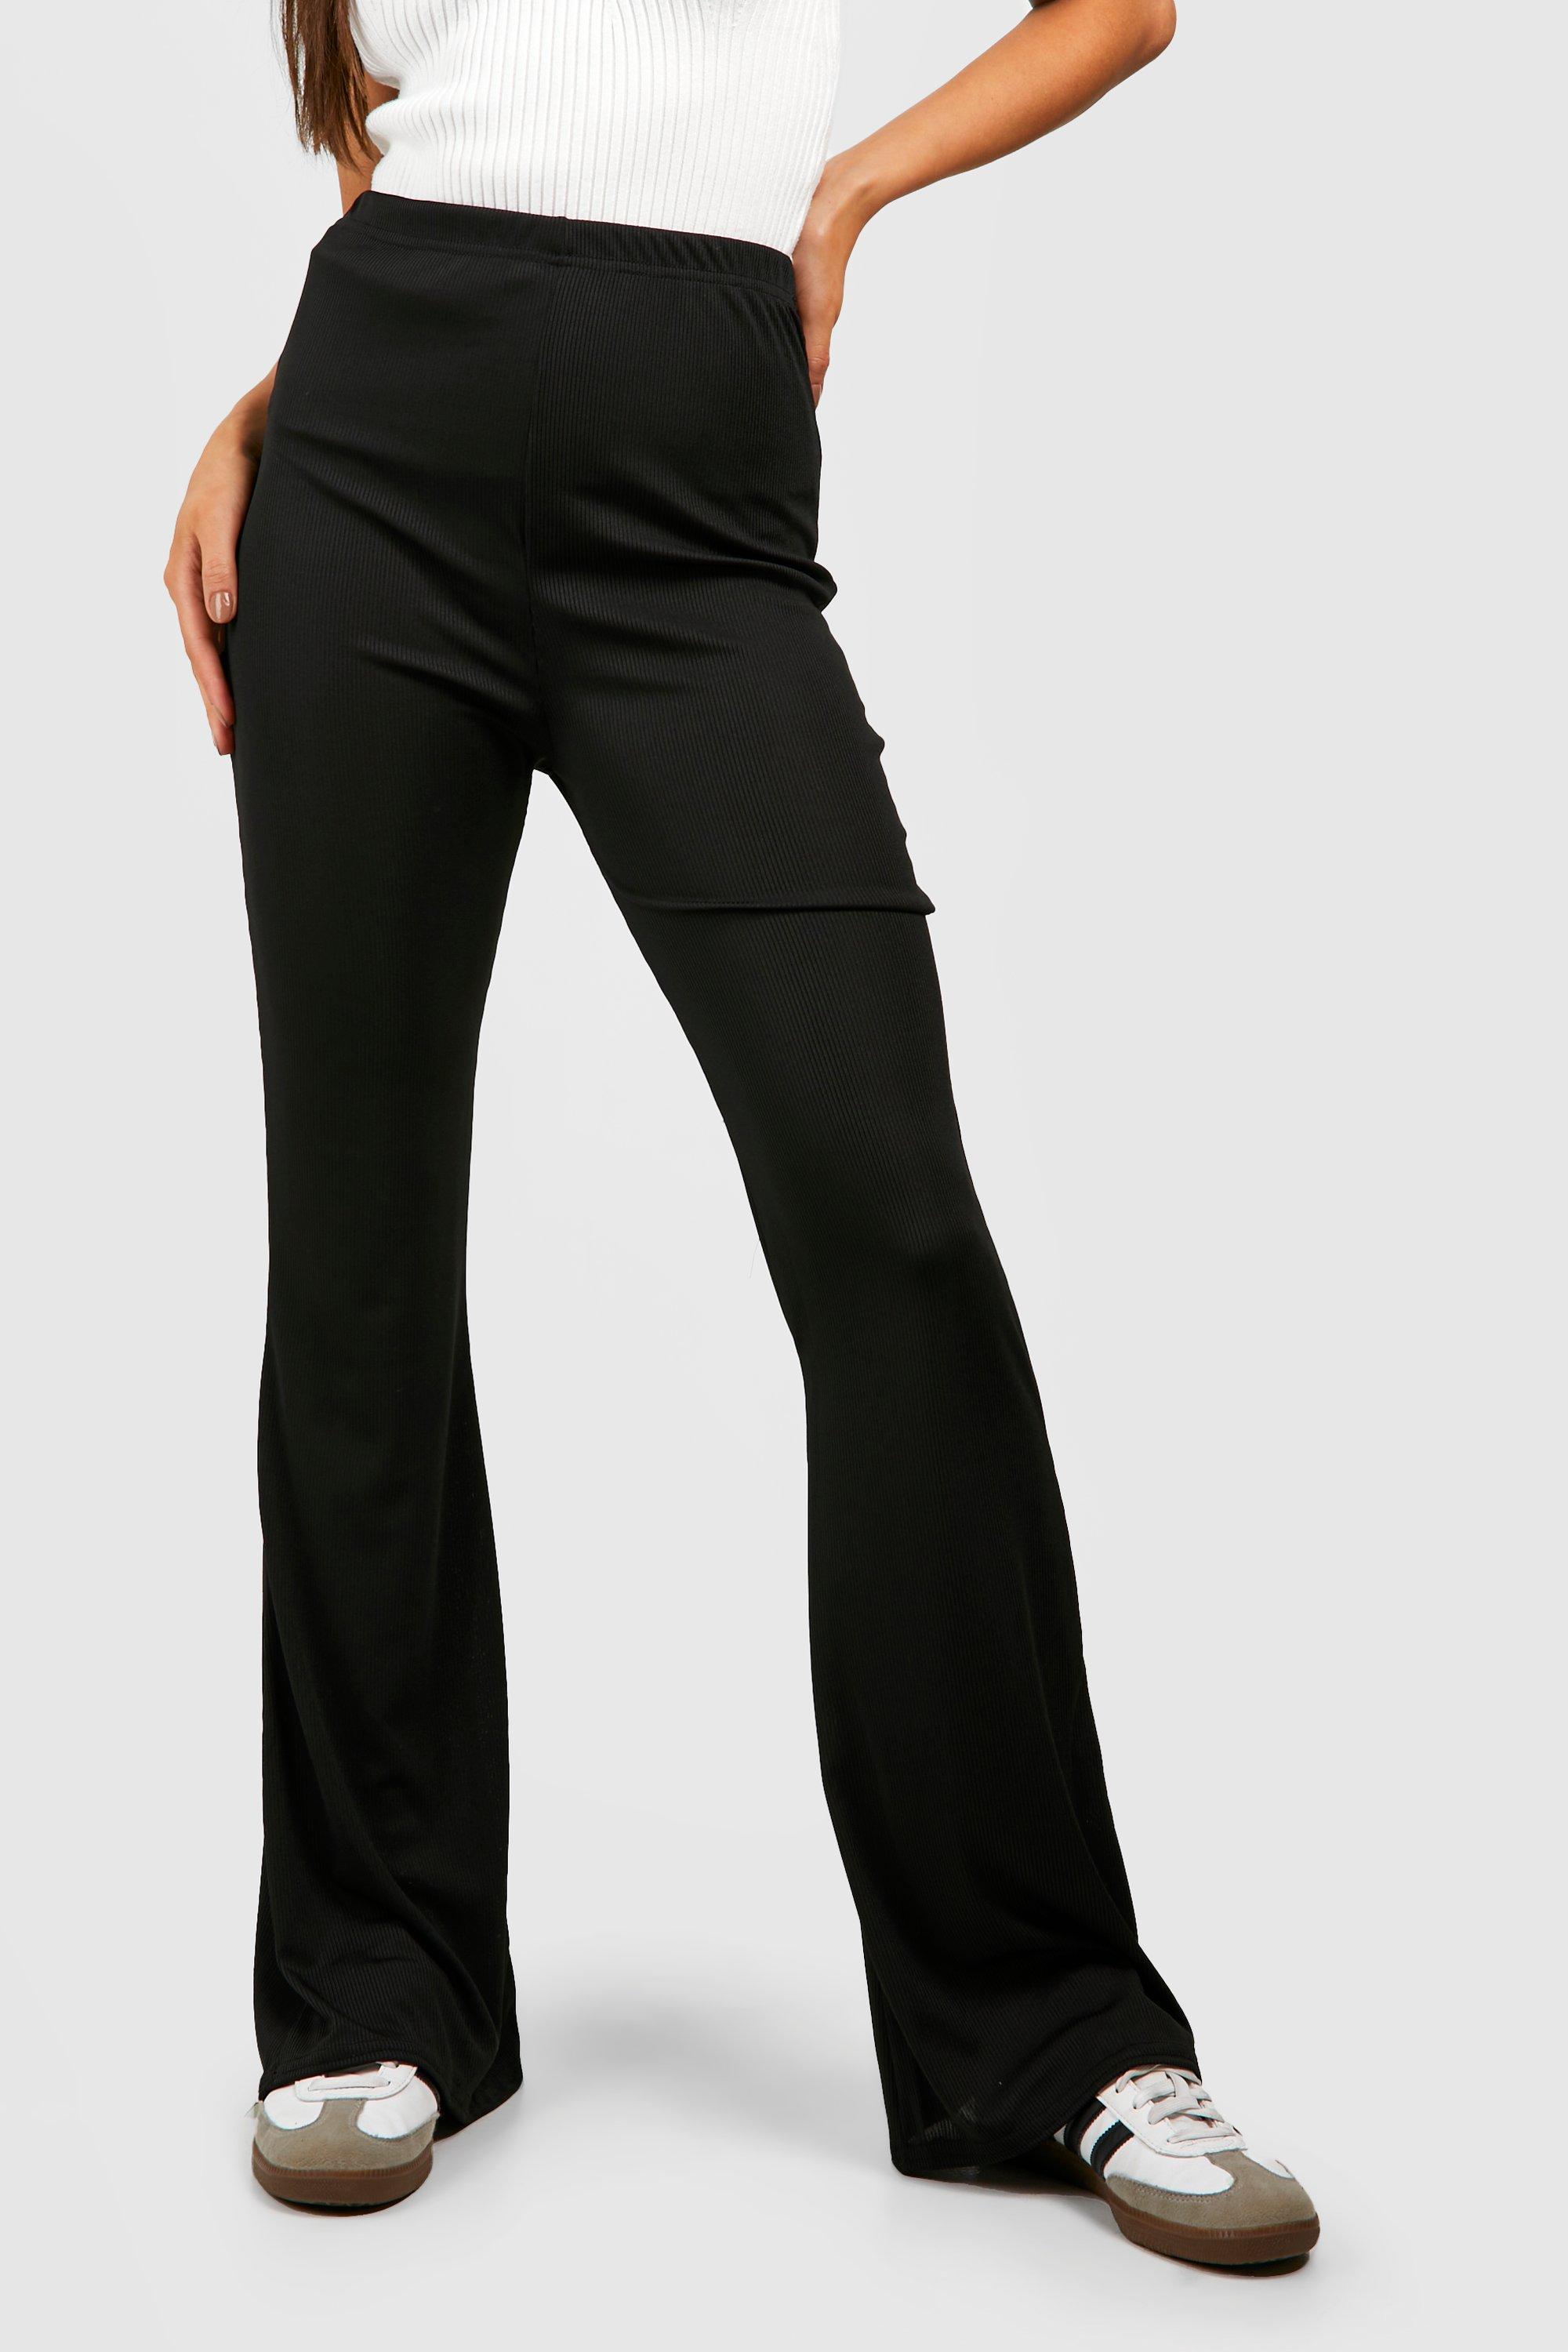 Women's Basic Ribbed High Waisted Flare Trousers